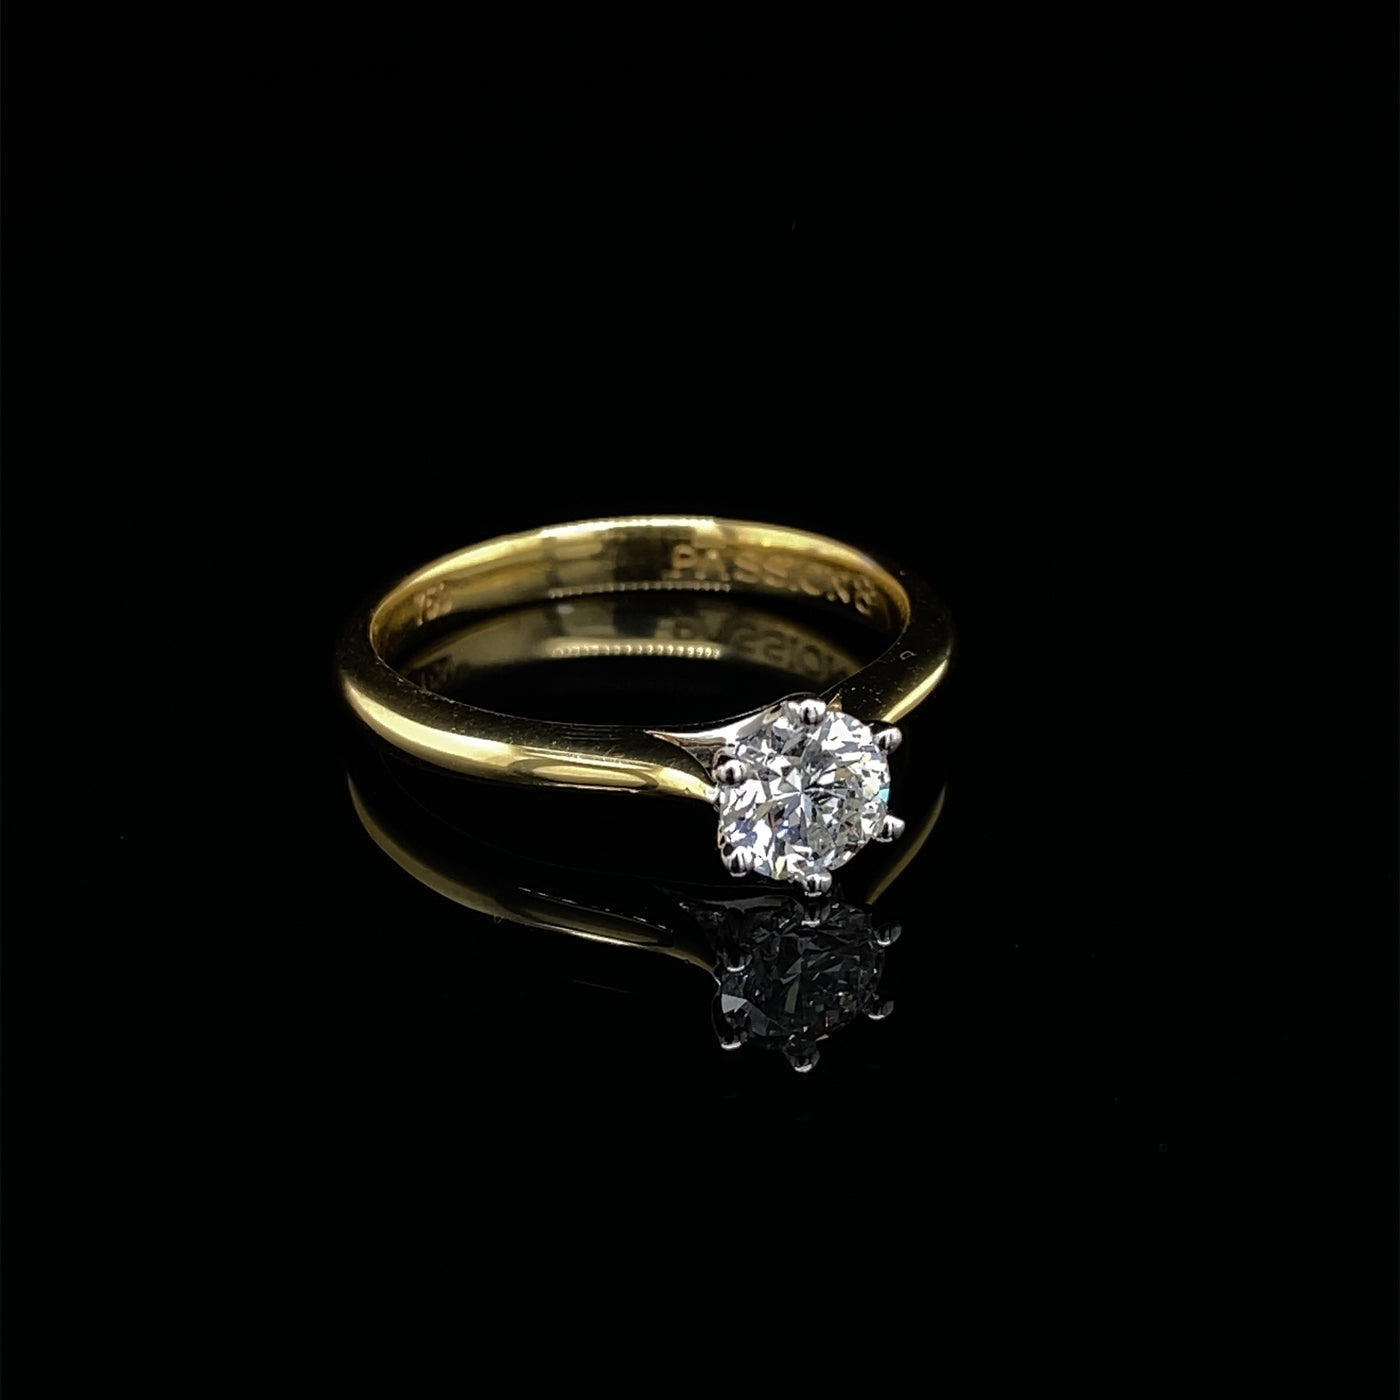 18ct Gold Solitaire Passion8 Diamond Ring - 0.59 Carats